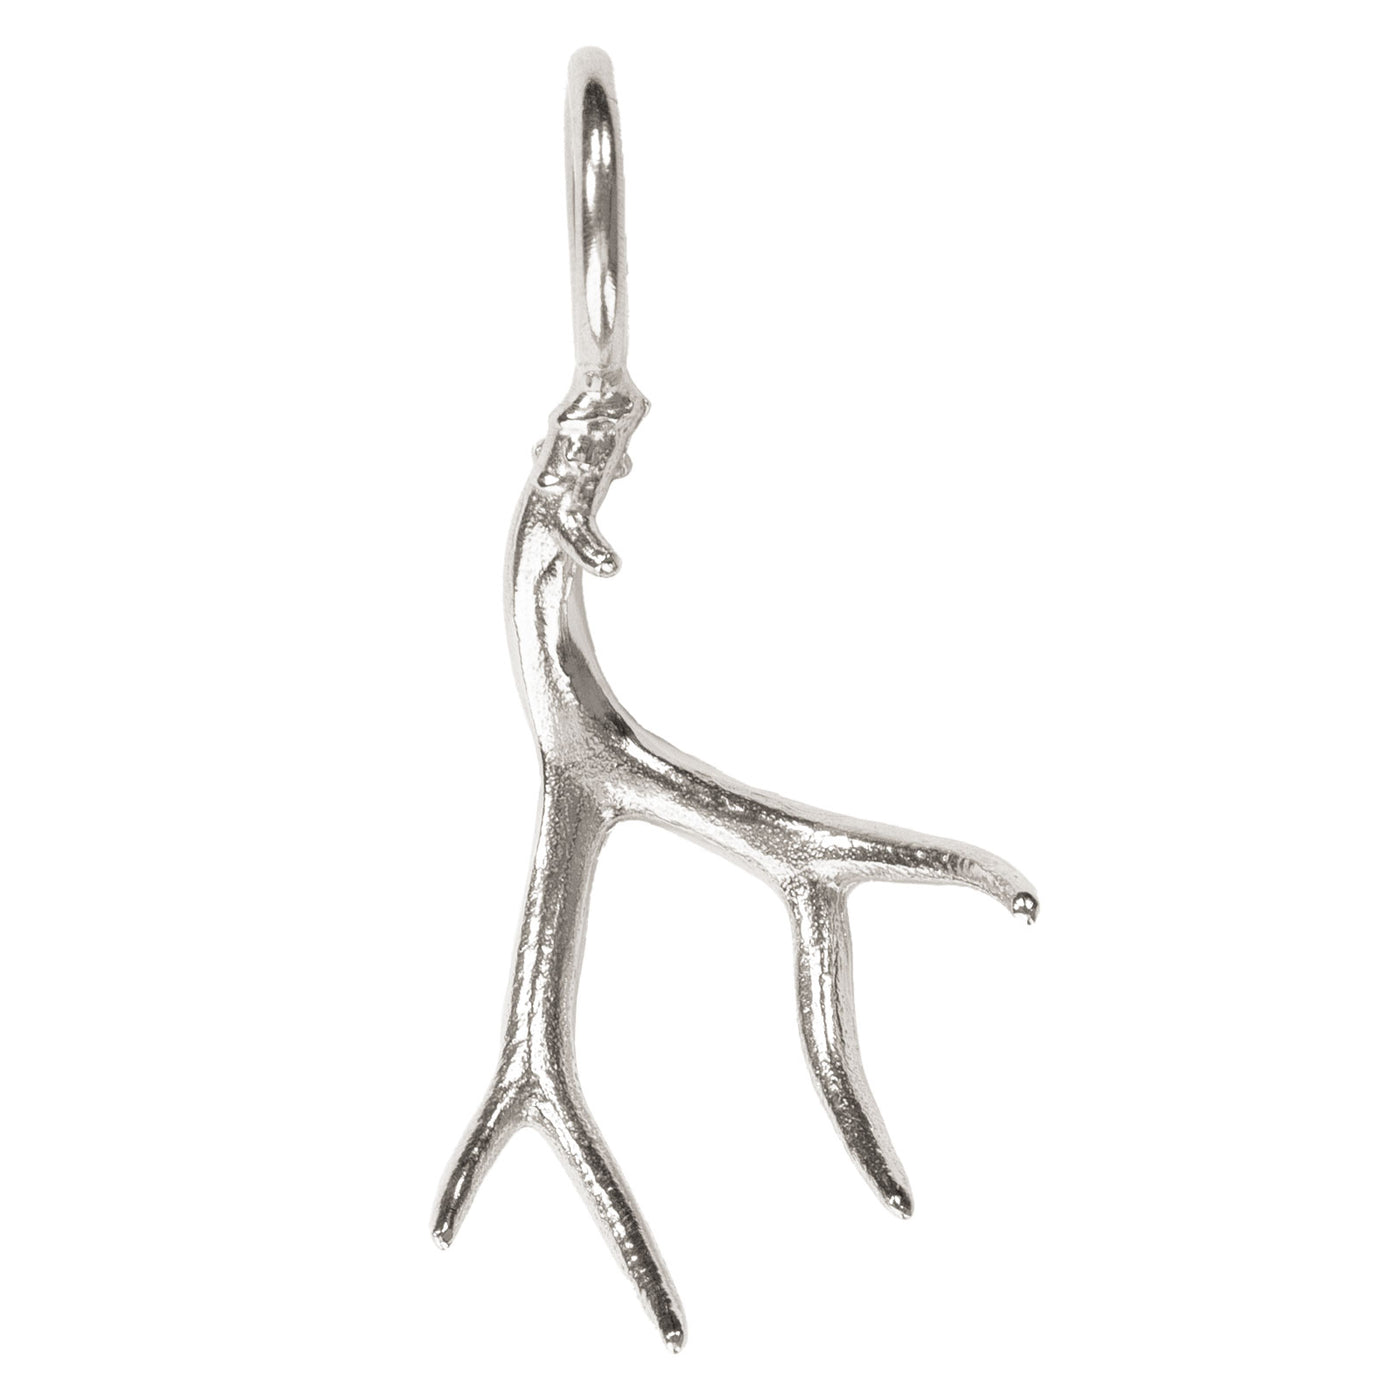 Small Silver Polished Antler Sculptural Charm